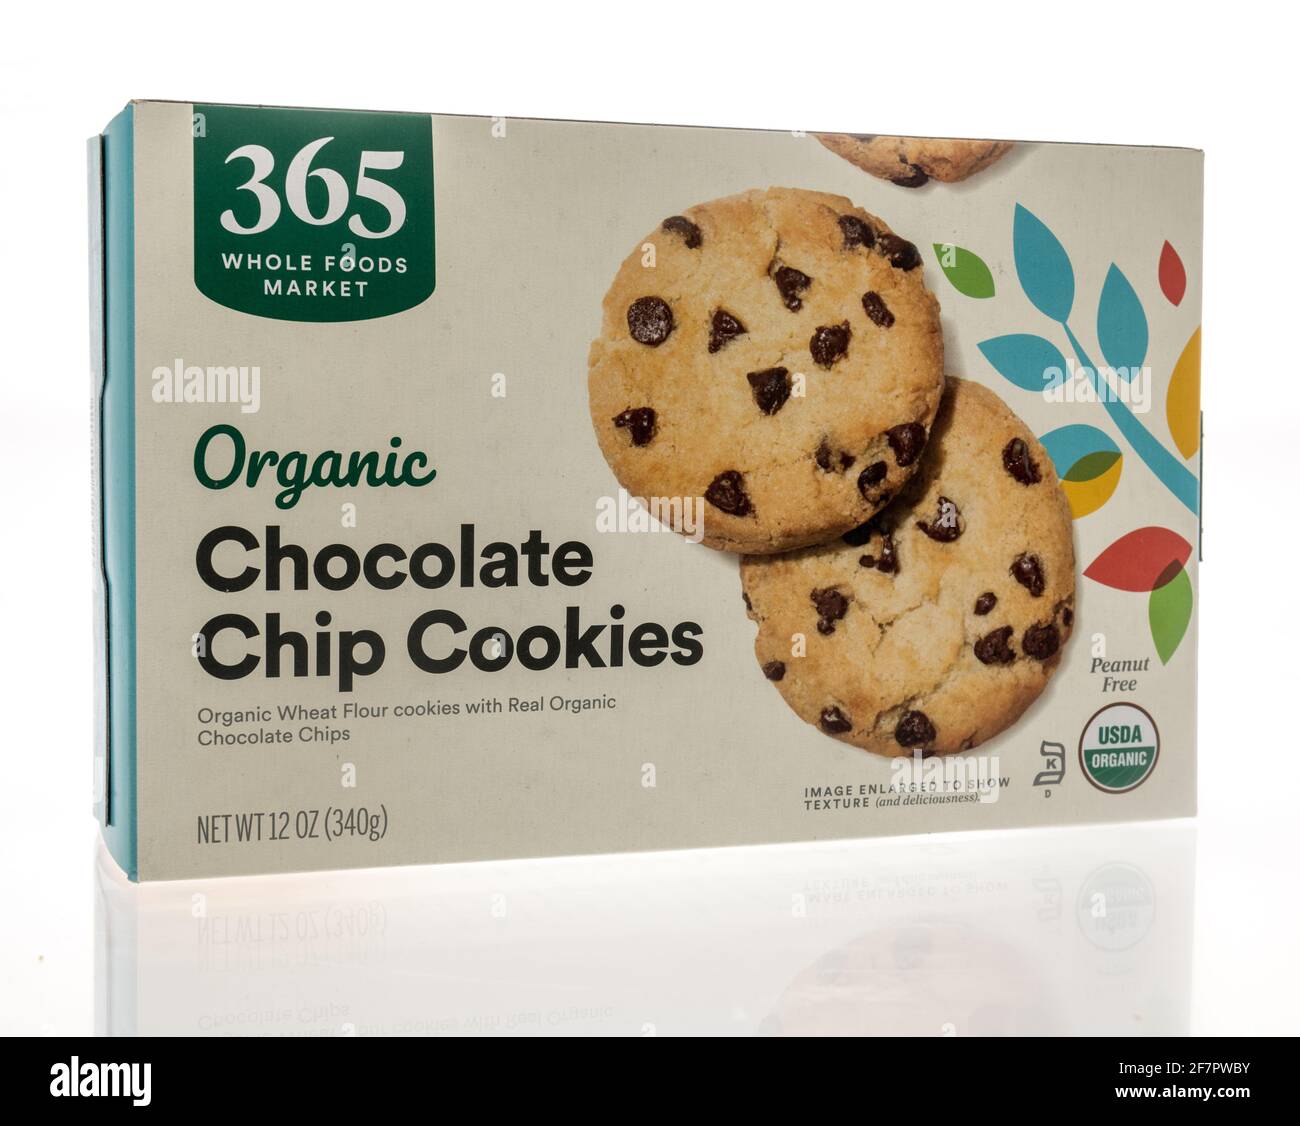 Winneconne, WI - 7 April 2021:  A package of 365 Whloe Foods Market organic chocolate chip cookies on an isolated background Stock Photo